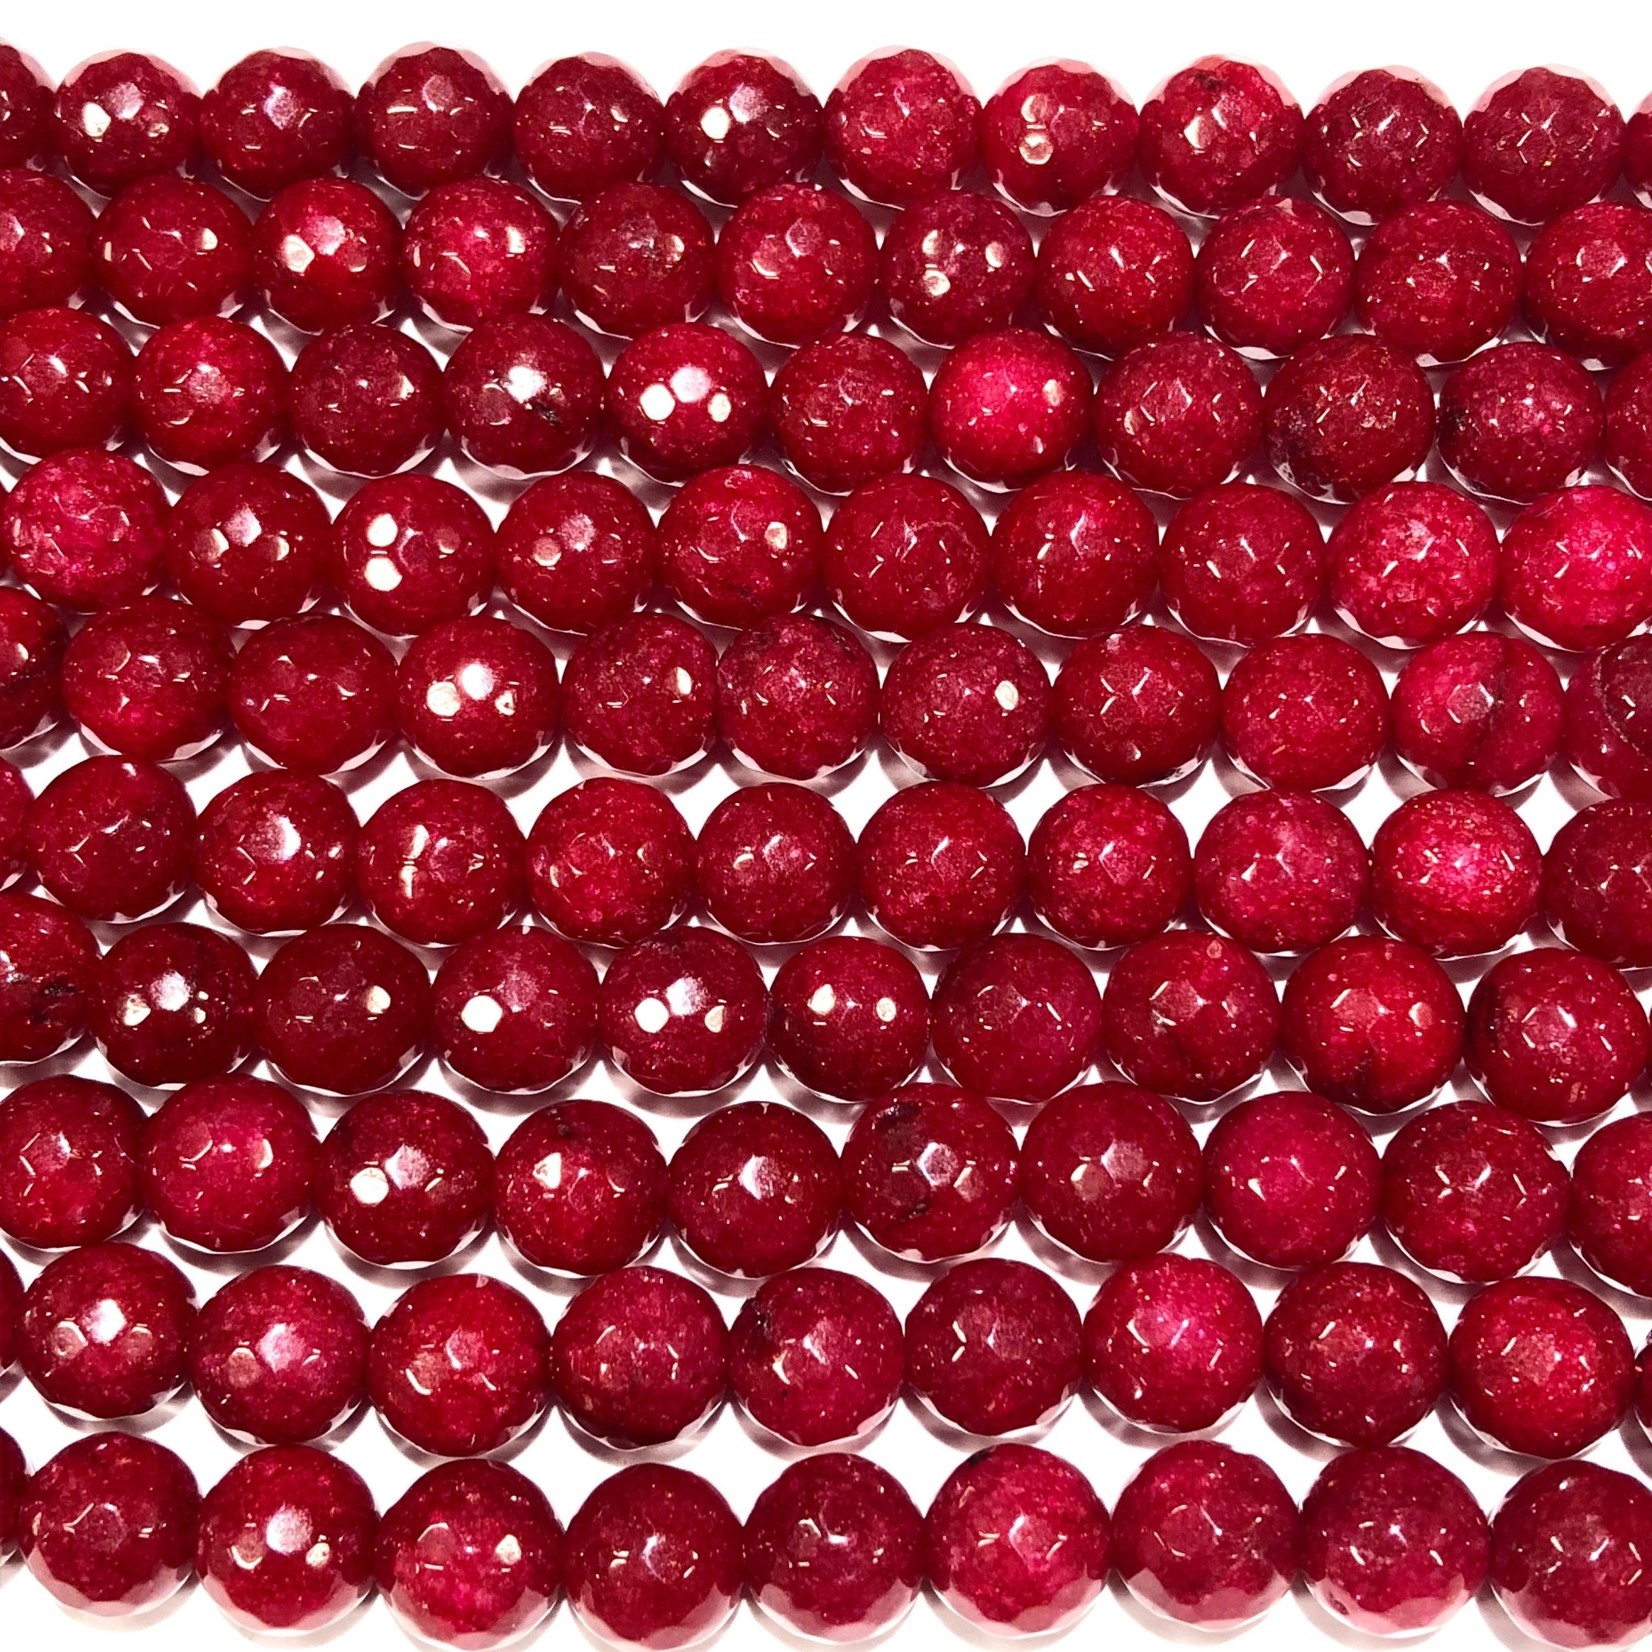 MALAYSIAN JADE Dyed Dark Red 8mm Faceted